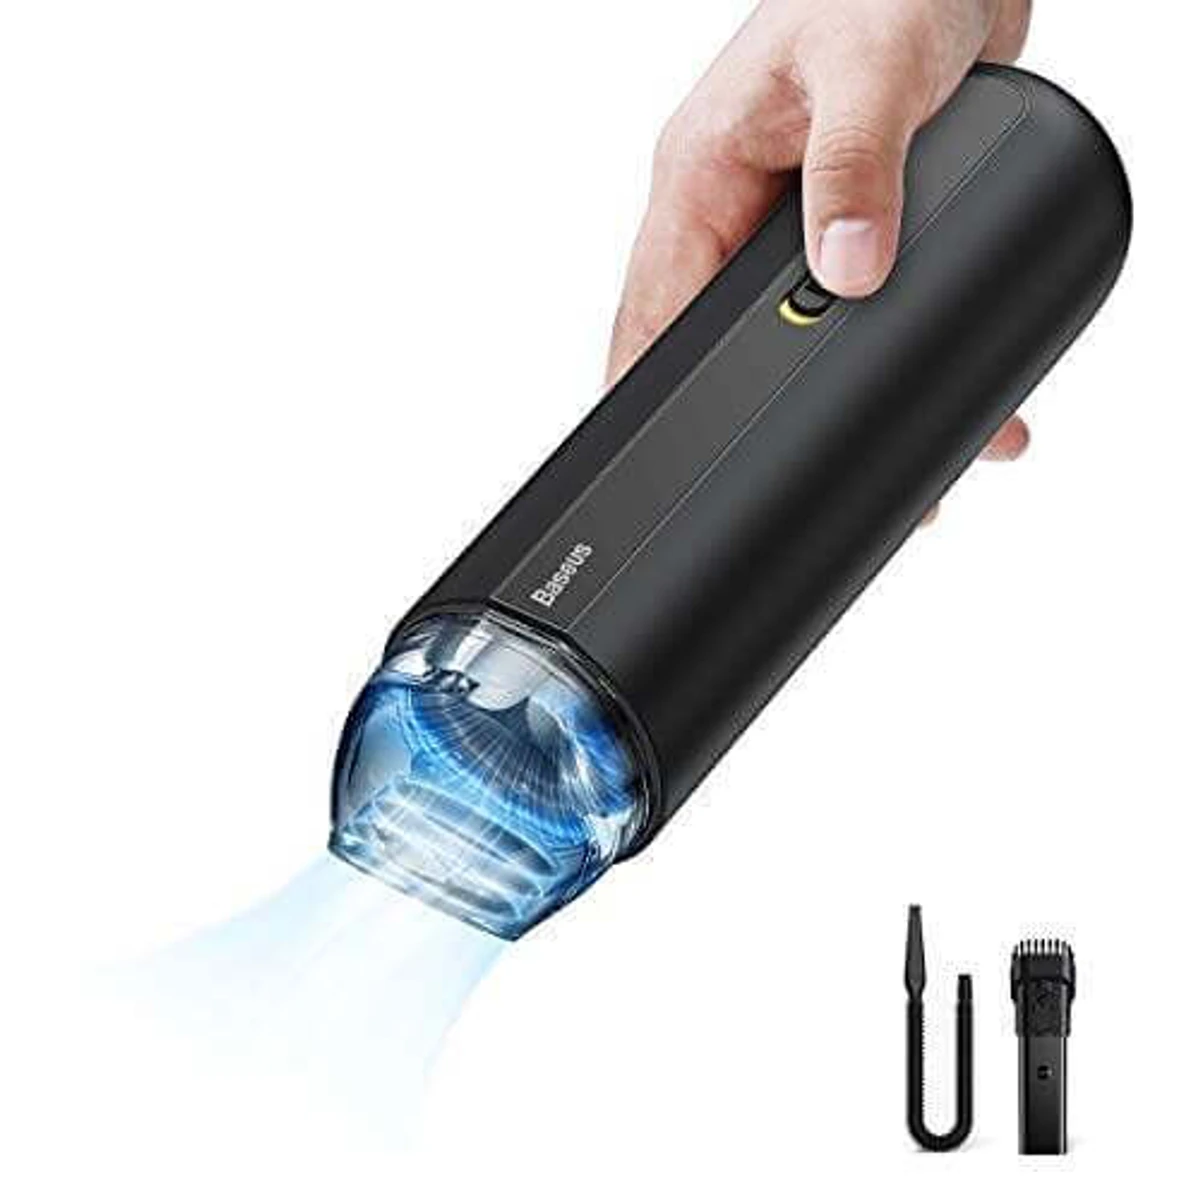 Baseus A2 Car Vacuum Cleaner 5000Pa Powerful Suction